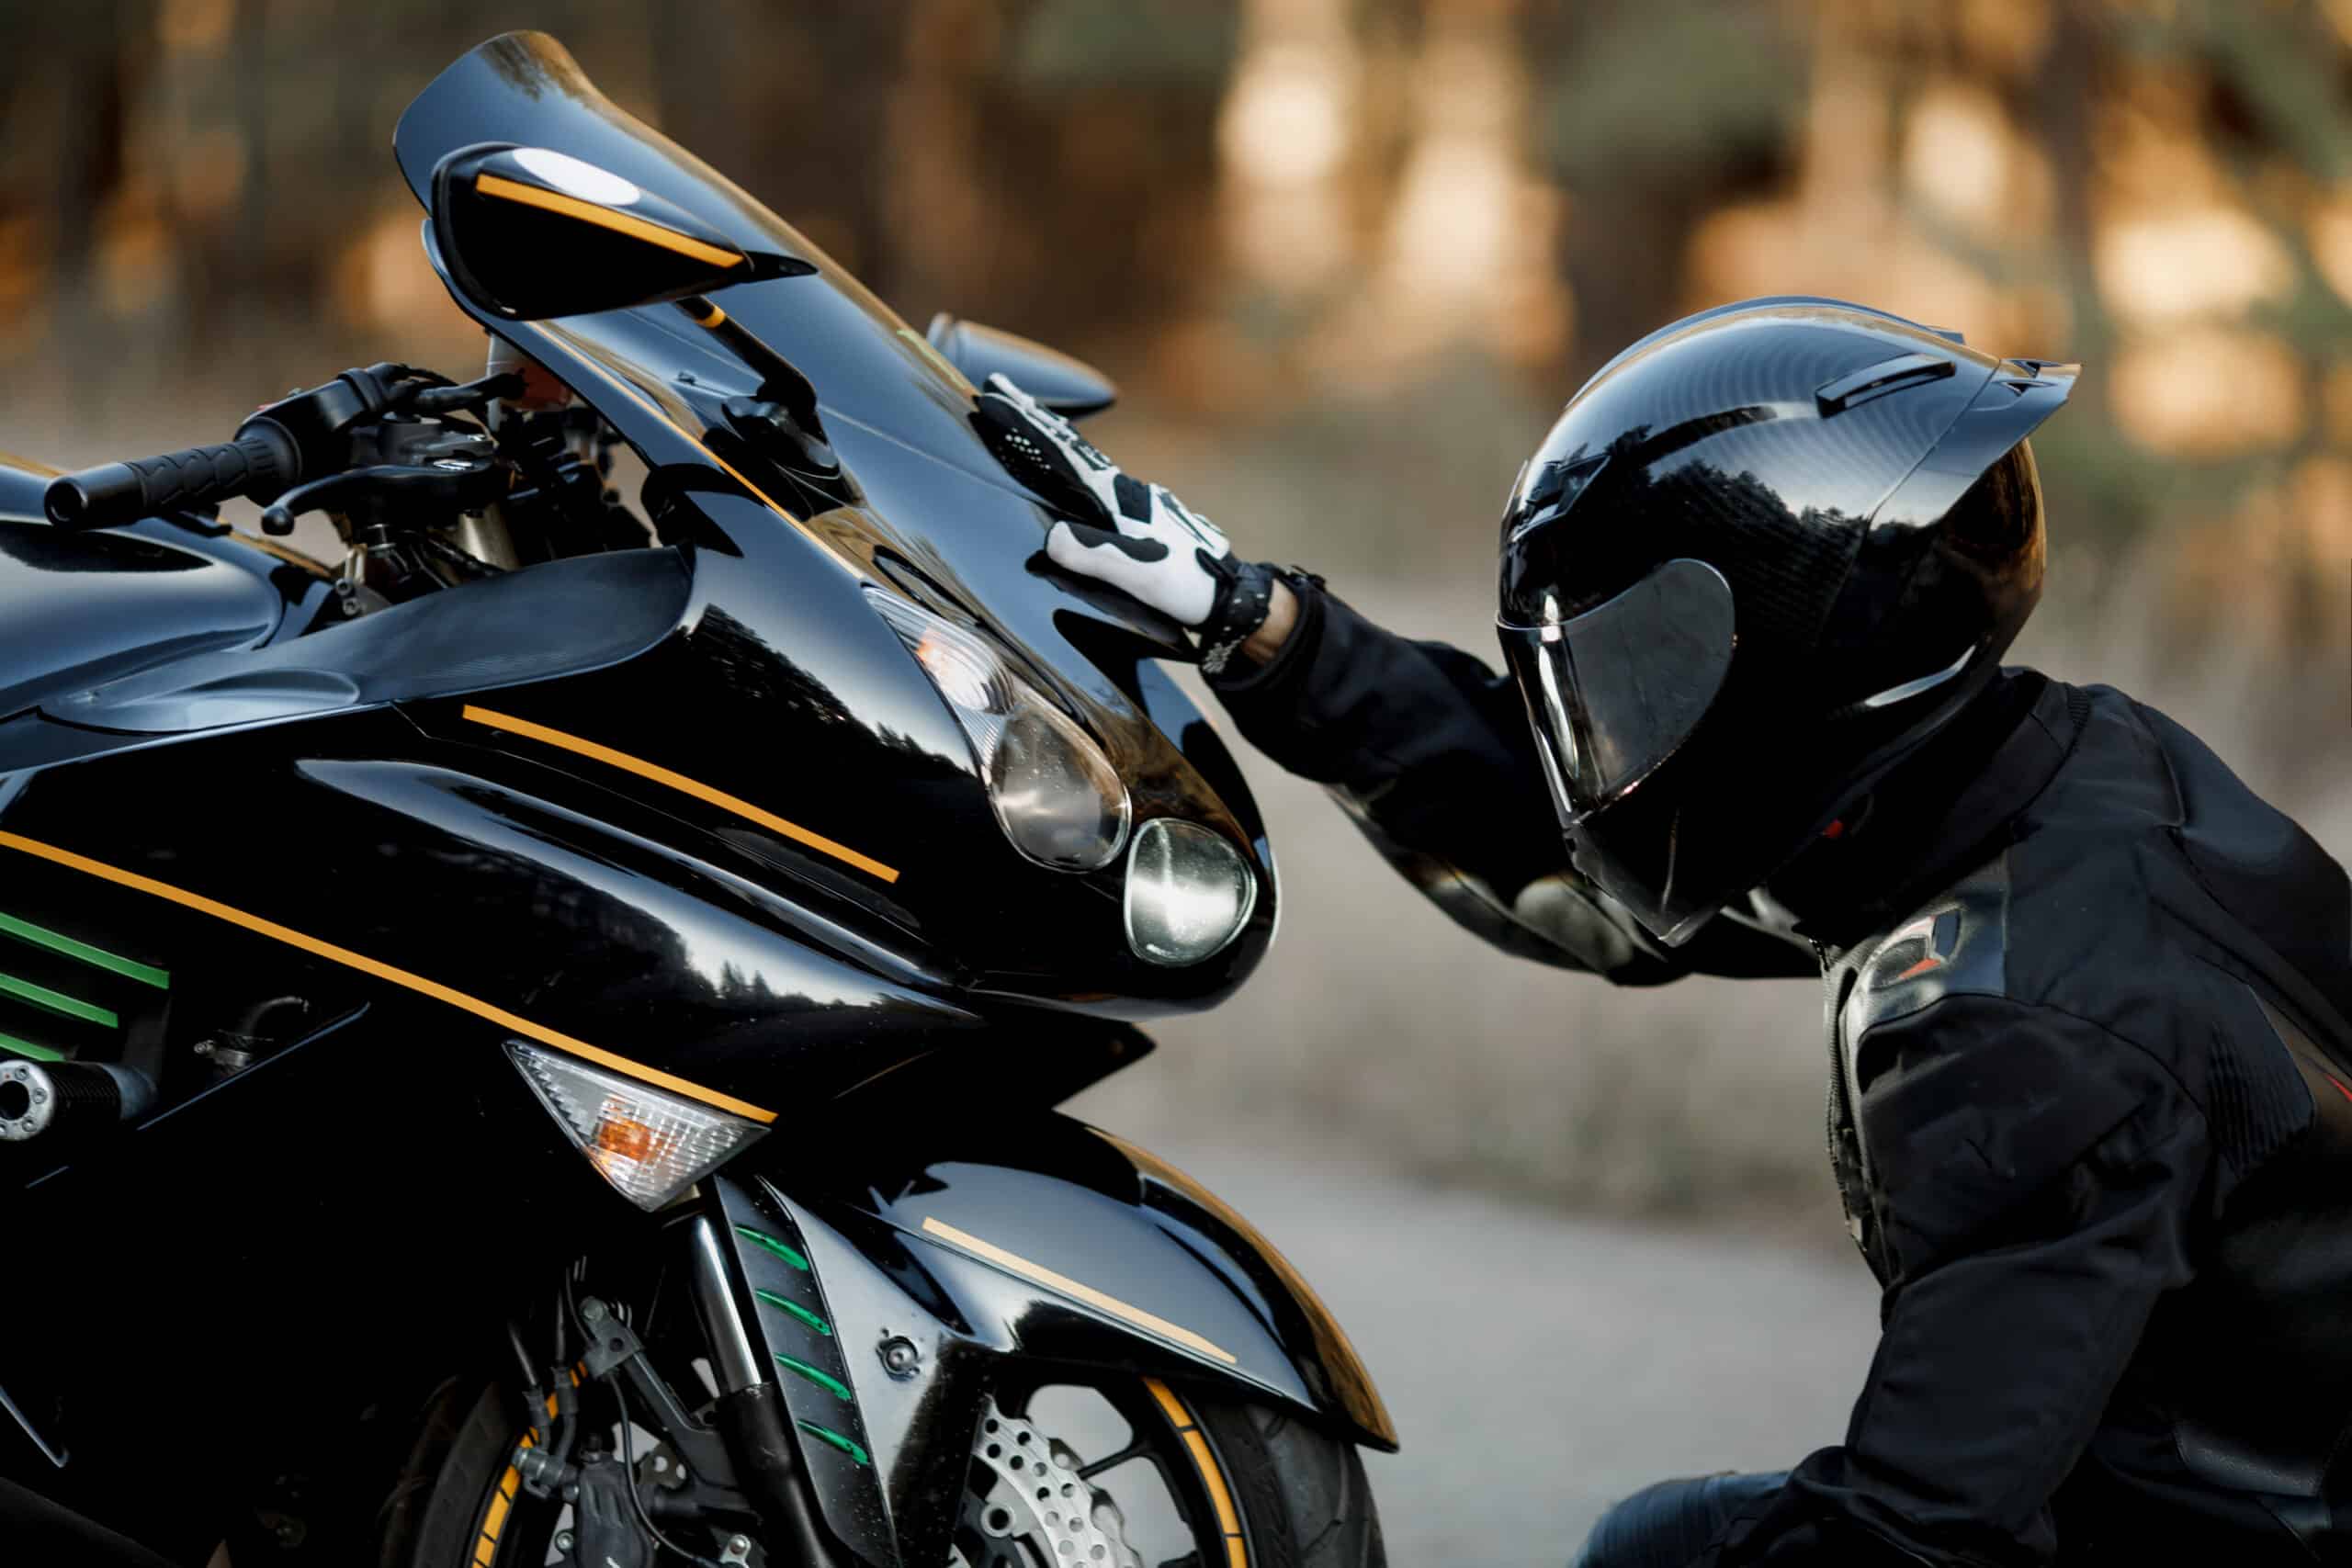 Rider in protective gear inspecting his bike to avoid needing a motorcycle accident lawyer